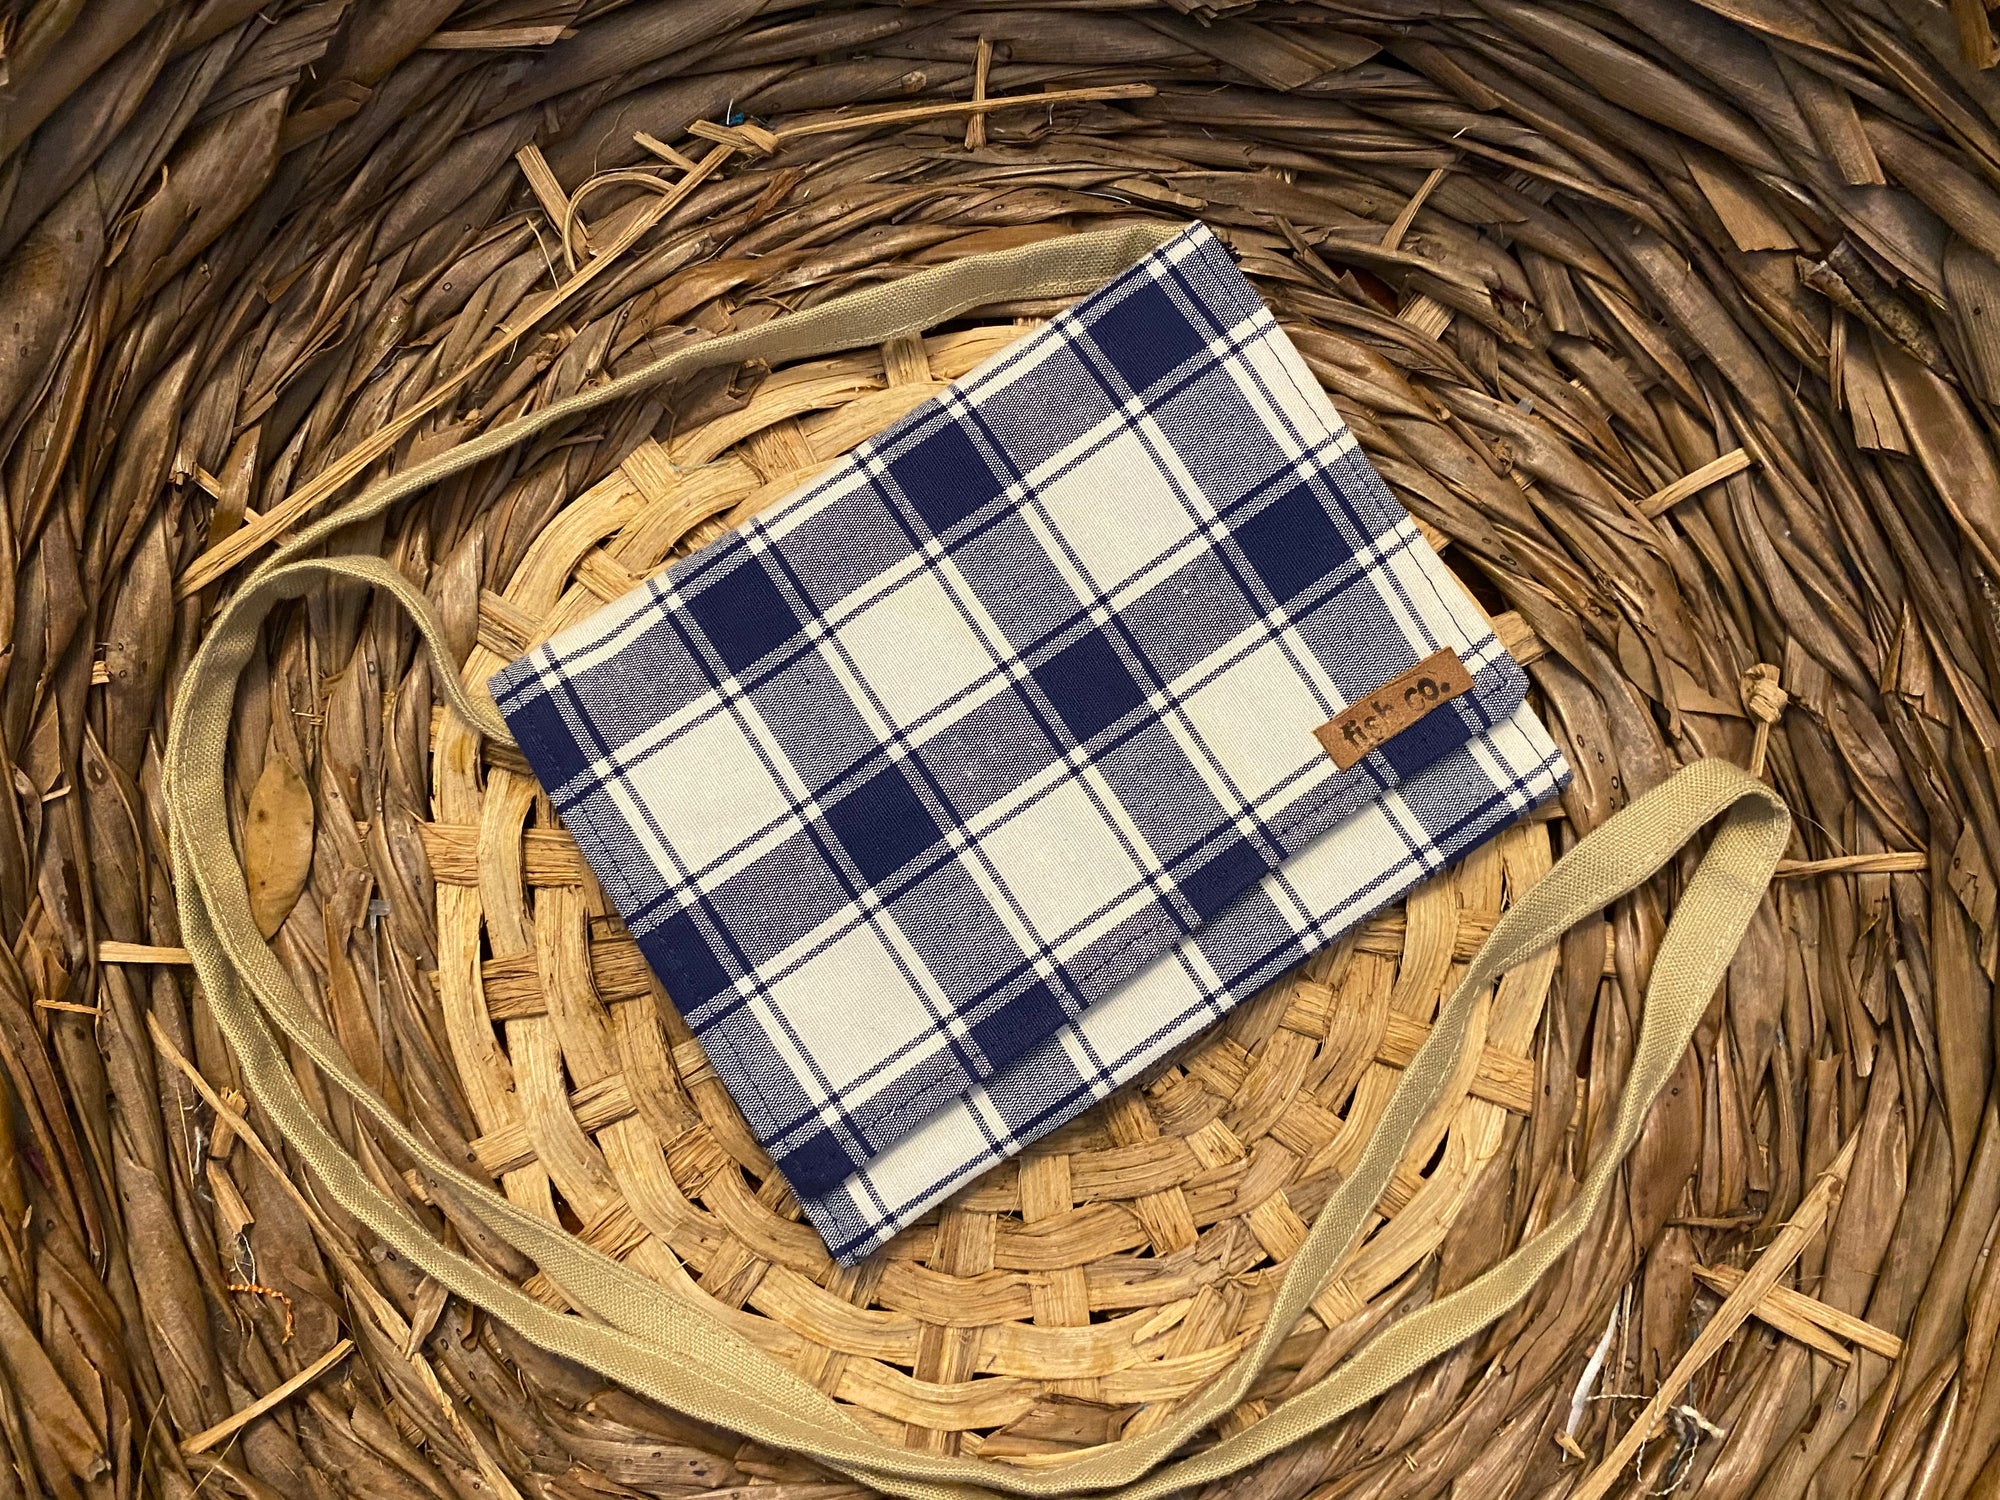 Small Satchel navy and cream plaid with black textured pattern inside